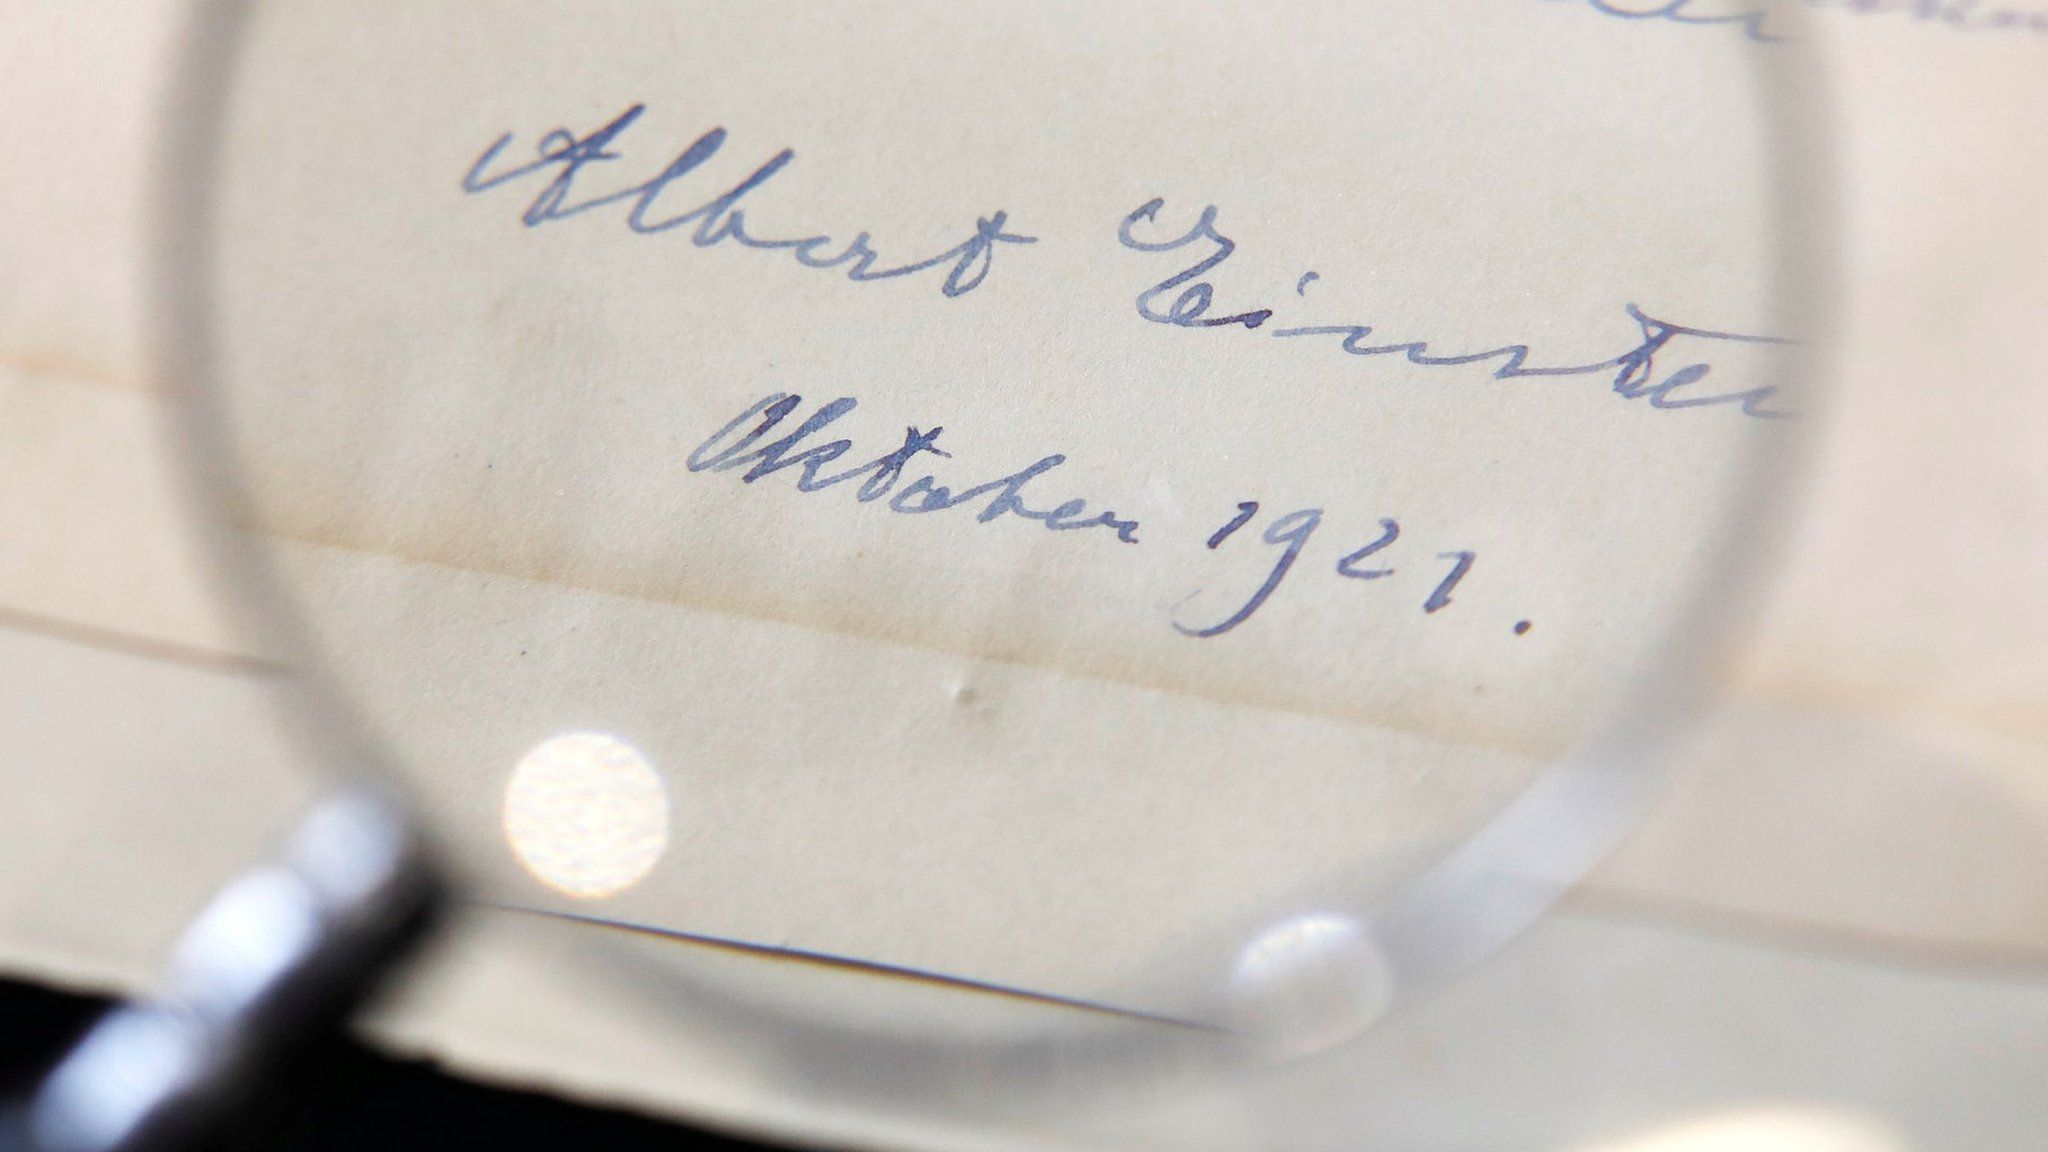 A note written by Albert Einstein to Italian chemistry student Elisabetta Piccini in Florence, Italy, in 1921 sold at an auction in Jerusalem on 6 March 2018.